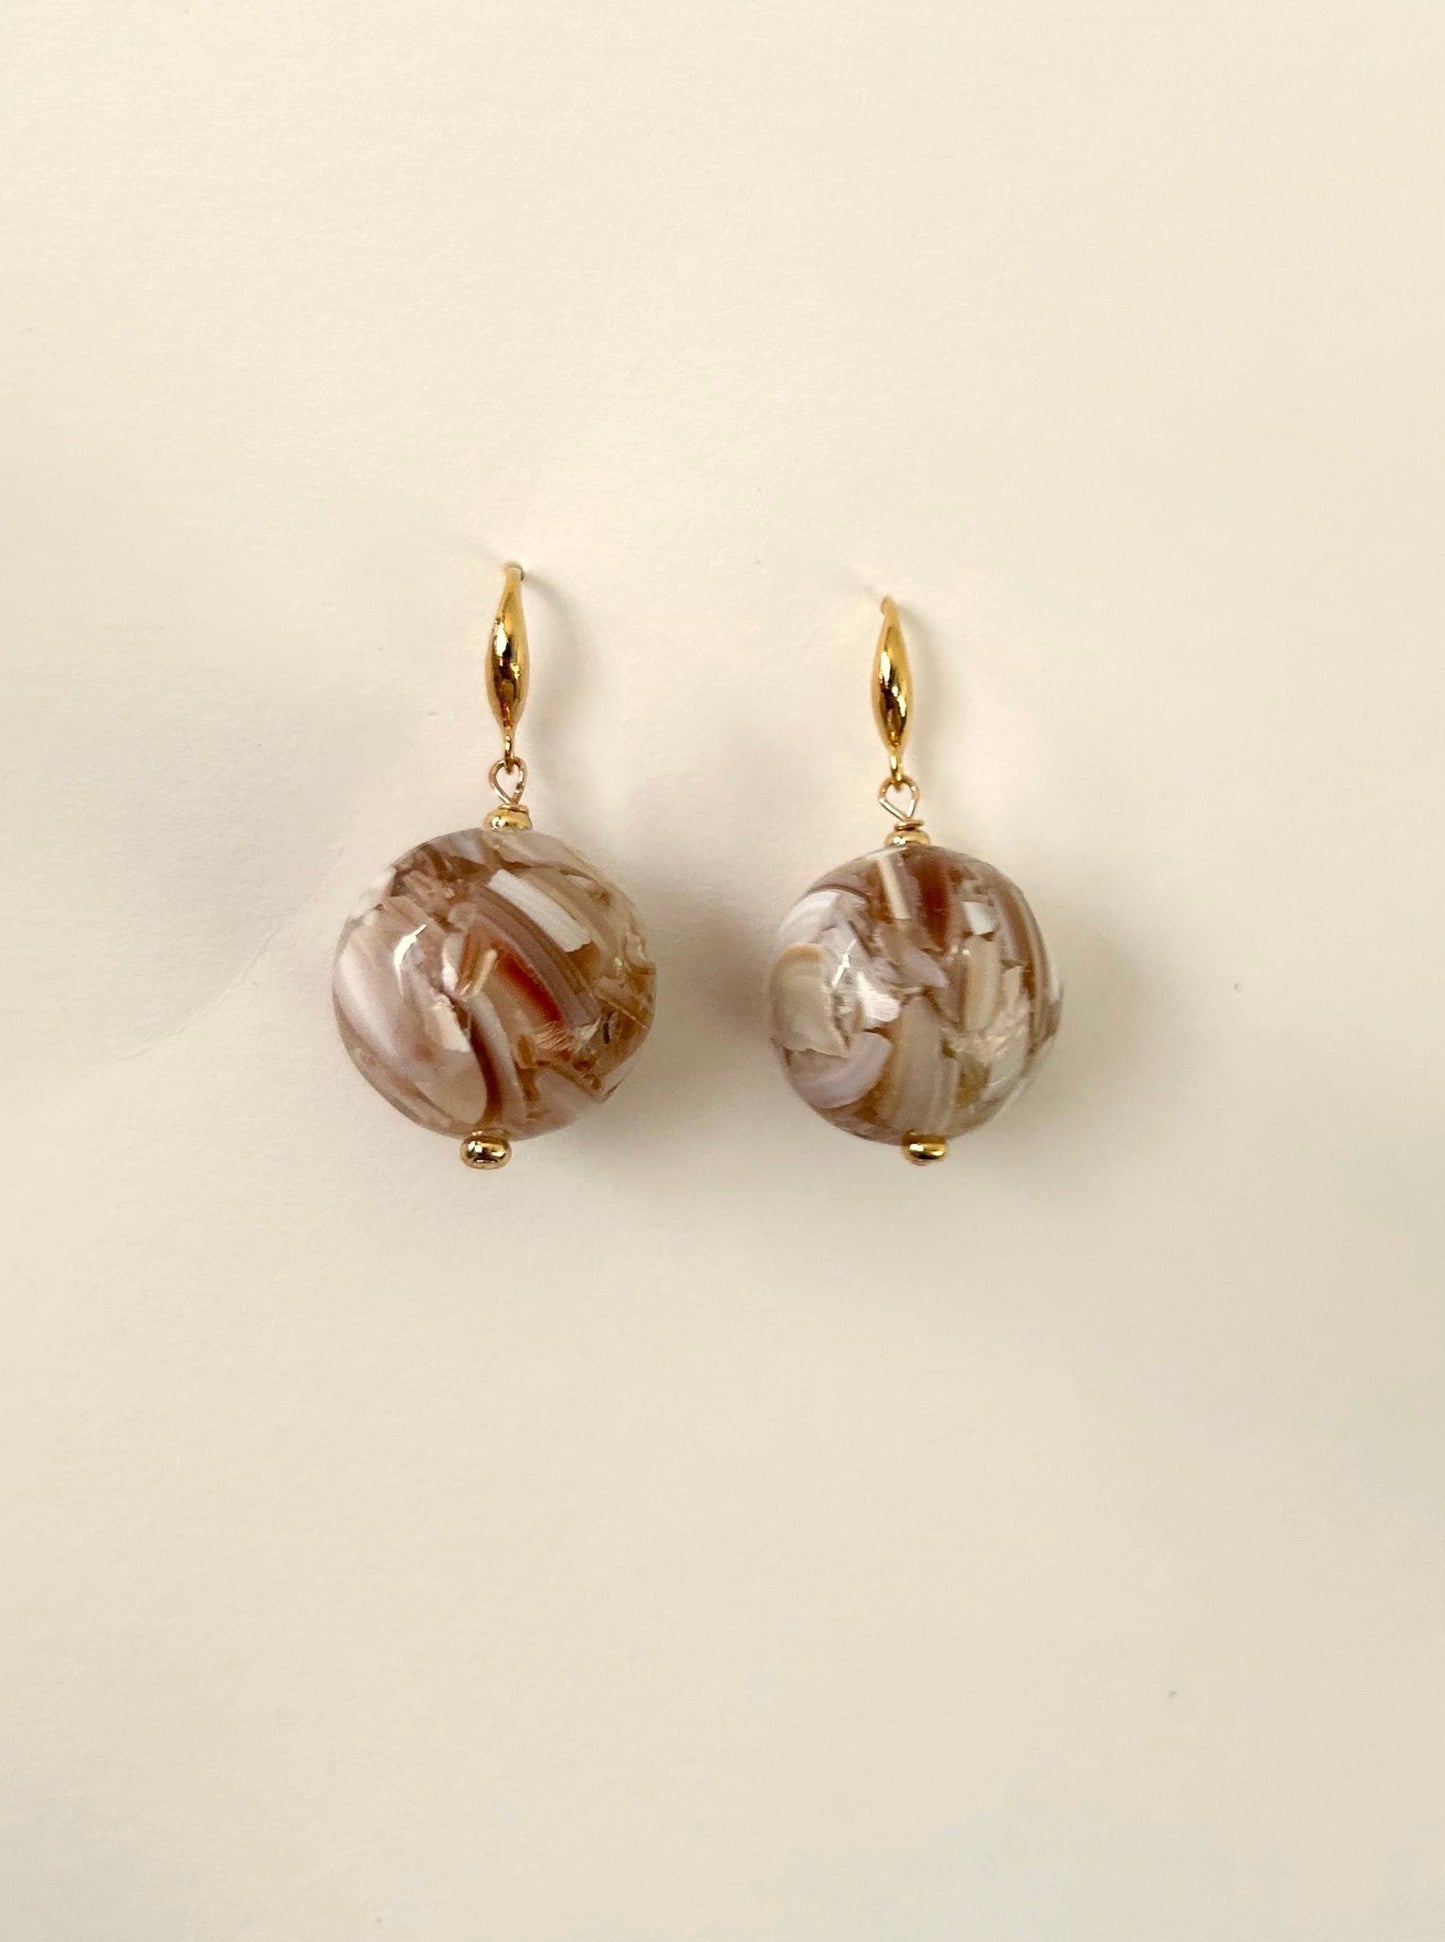 Sunset Earrings in Mother of Pearl